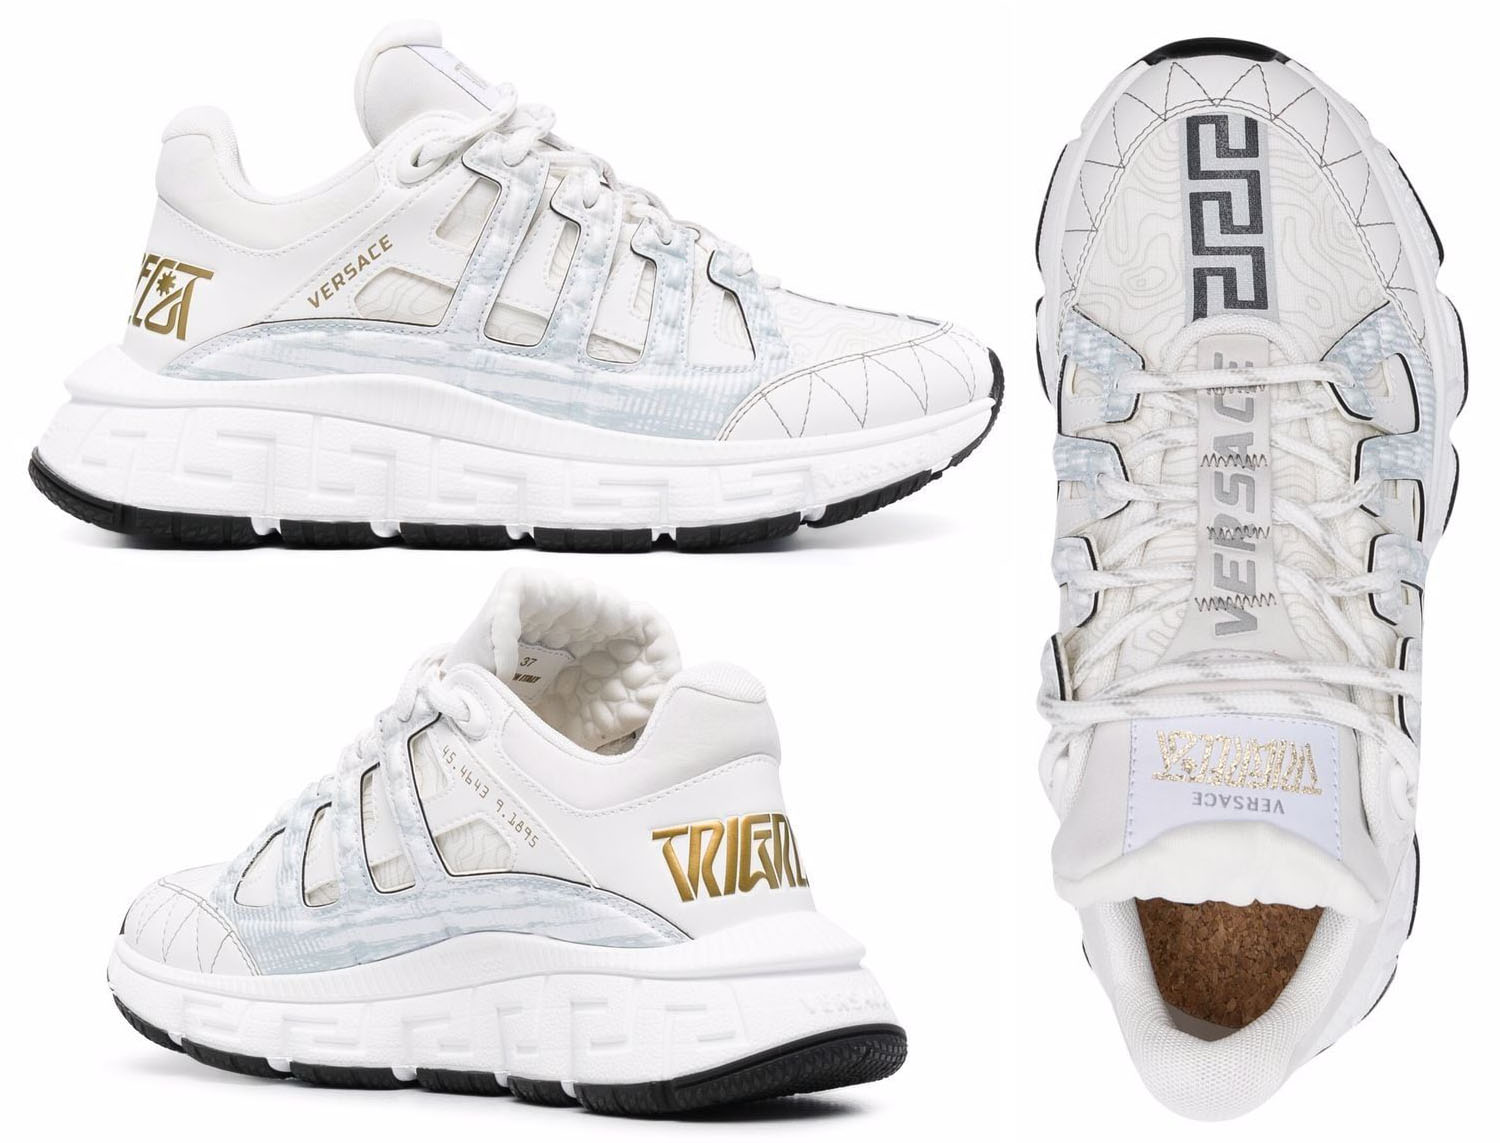 The Versace Trigeca chunky sneakers are easily recognizable with a logo patch at the tongue, an embossed rear logo, printed coordinates of Milan, and a Greca pattern embossed sole